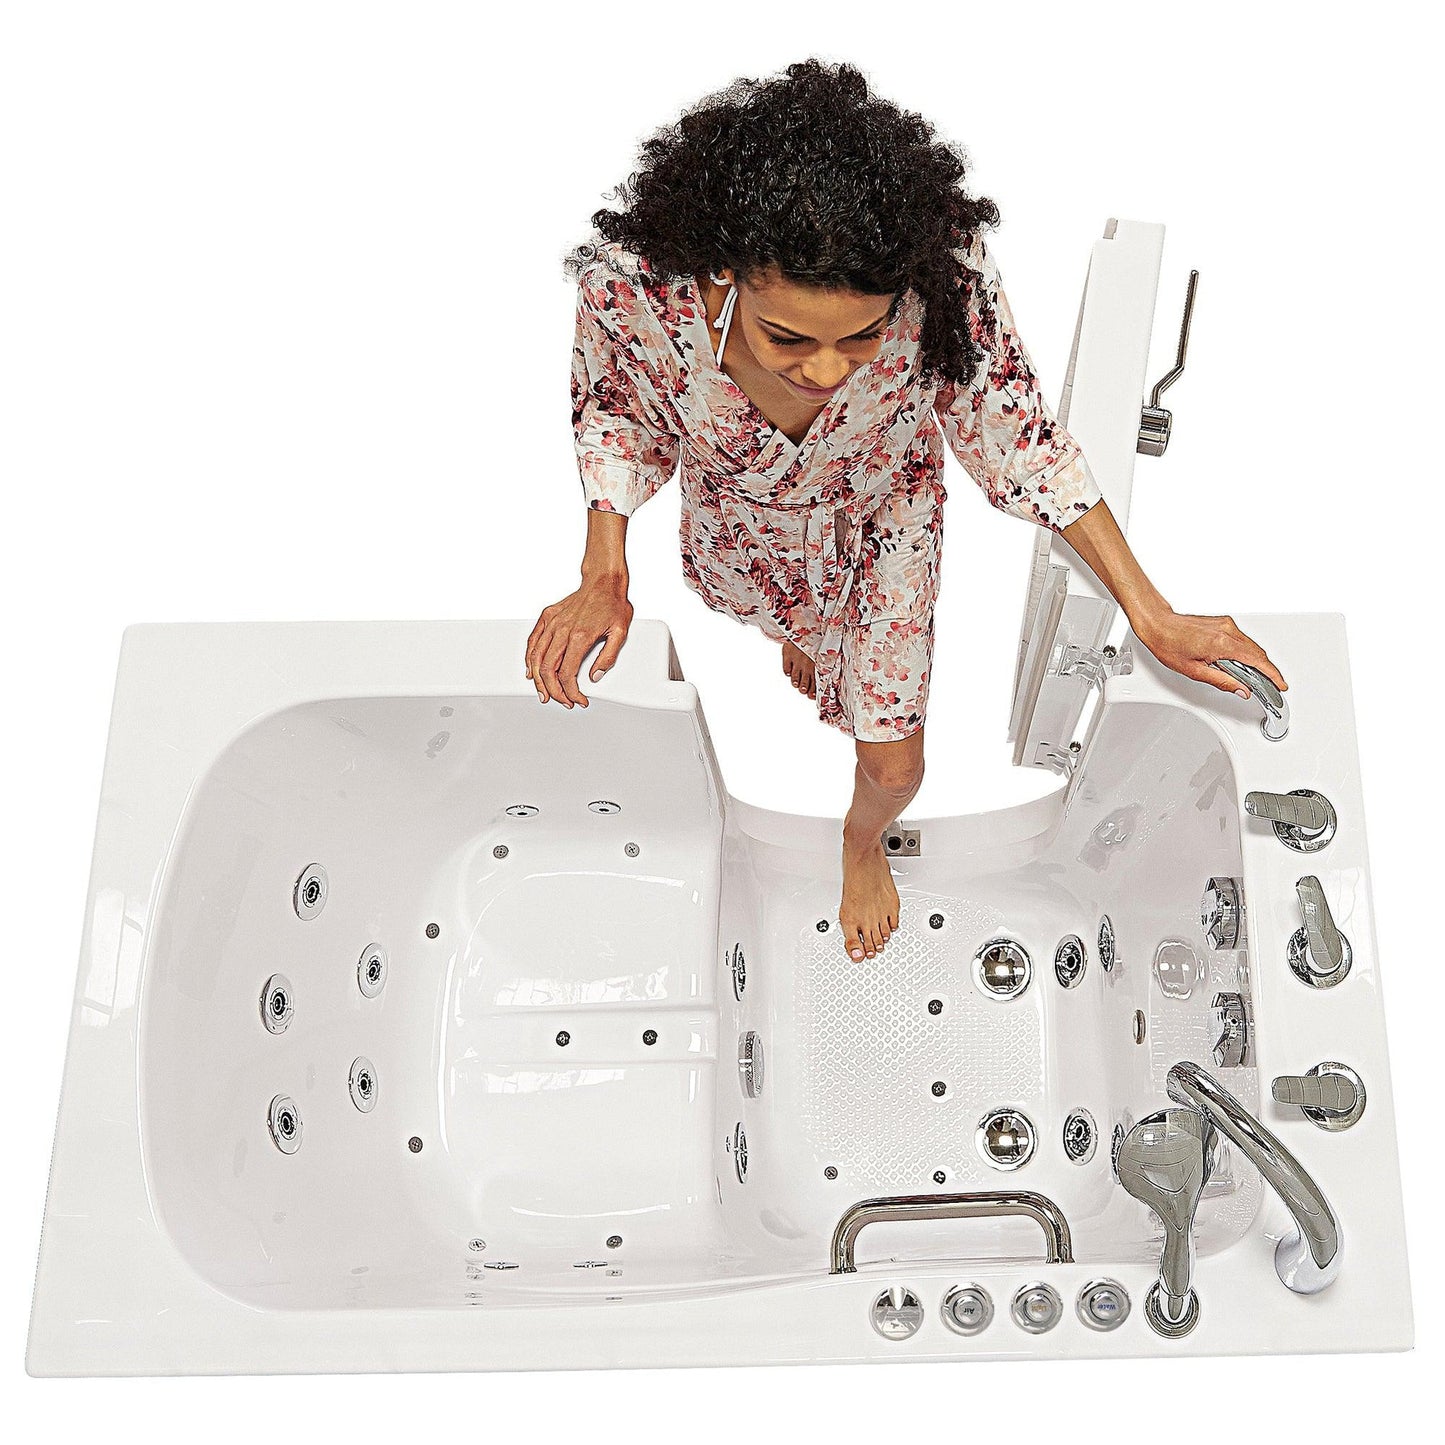 Ella's Bubbles Capri 30" x 52" White Acrylic Air and Hydro Massage Walk-In Bathtub With 5-Piece Fast Fill Faucet, 2" Dual Drain and Right Outward Swing Door